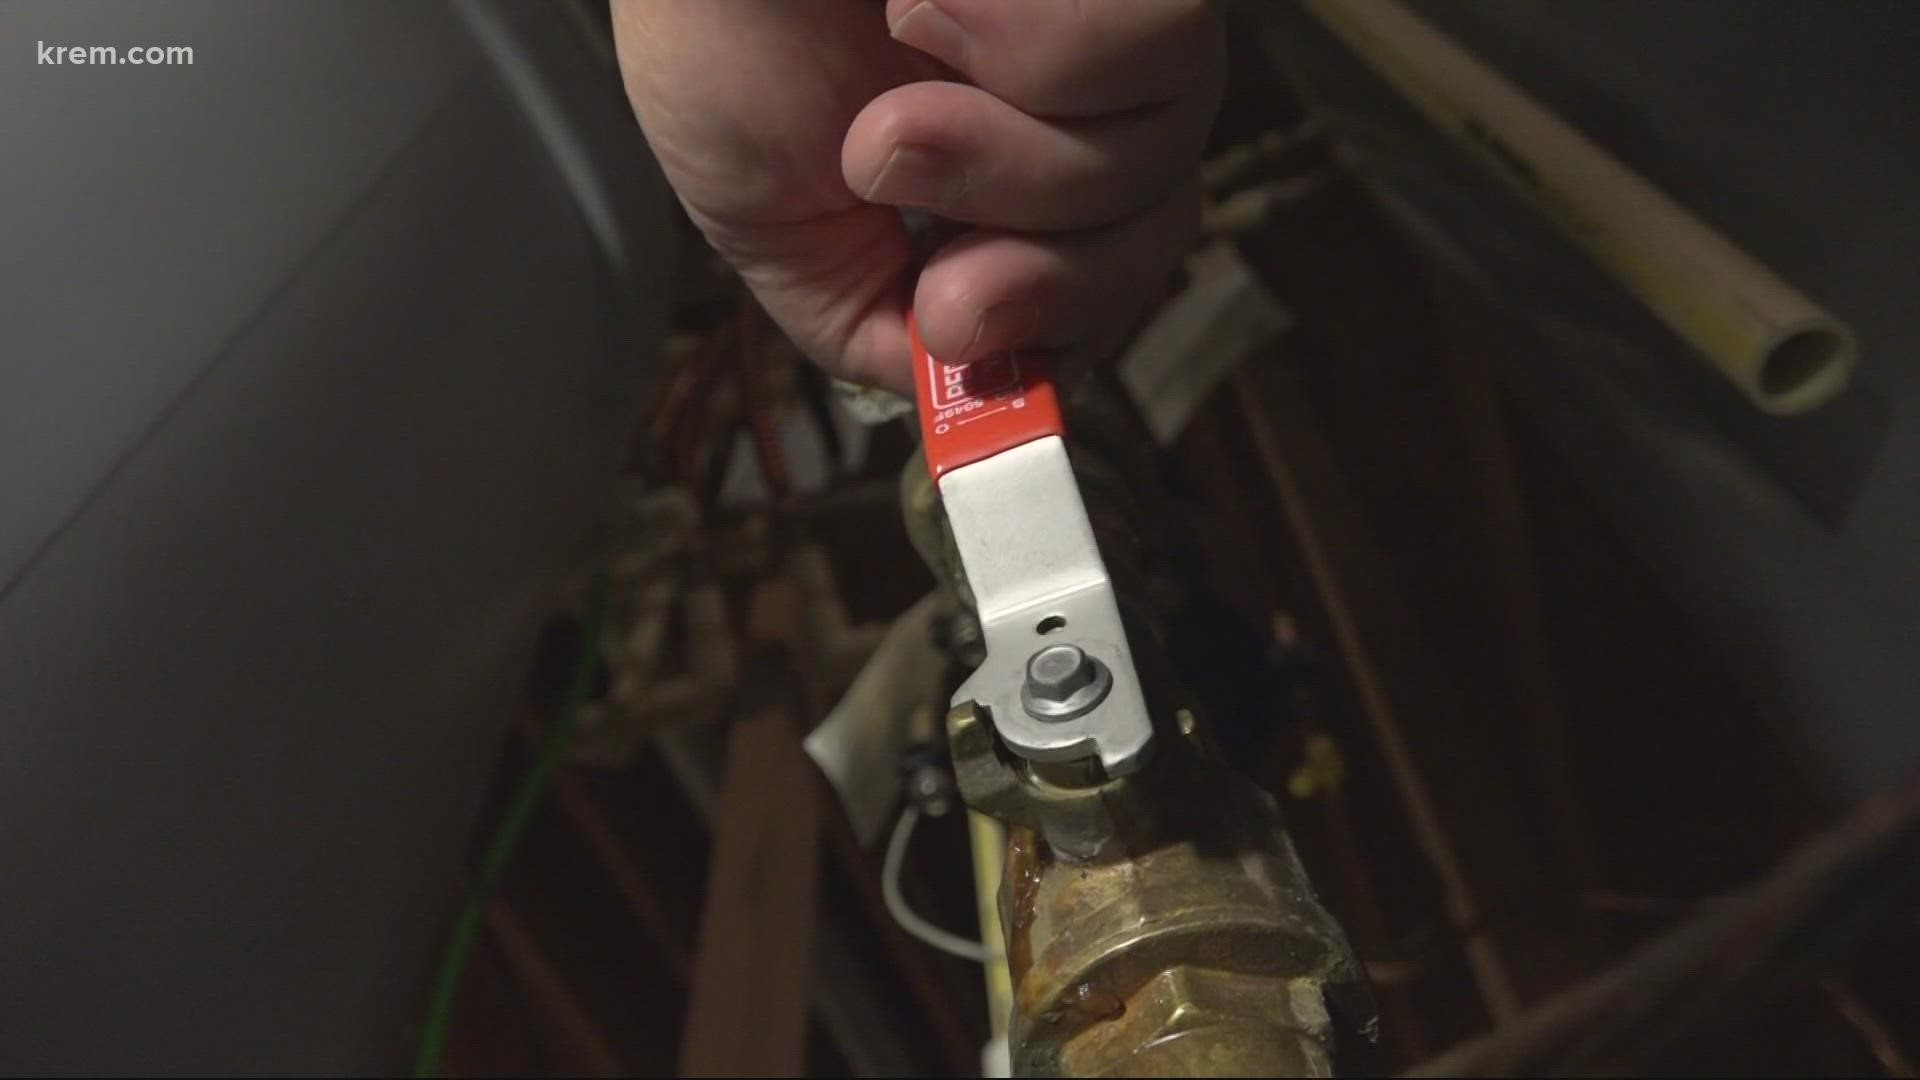 The cold weather has local plumbers bracing for a surge of calls.